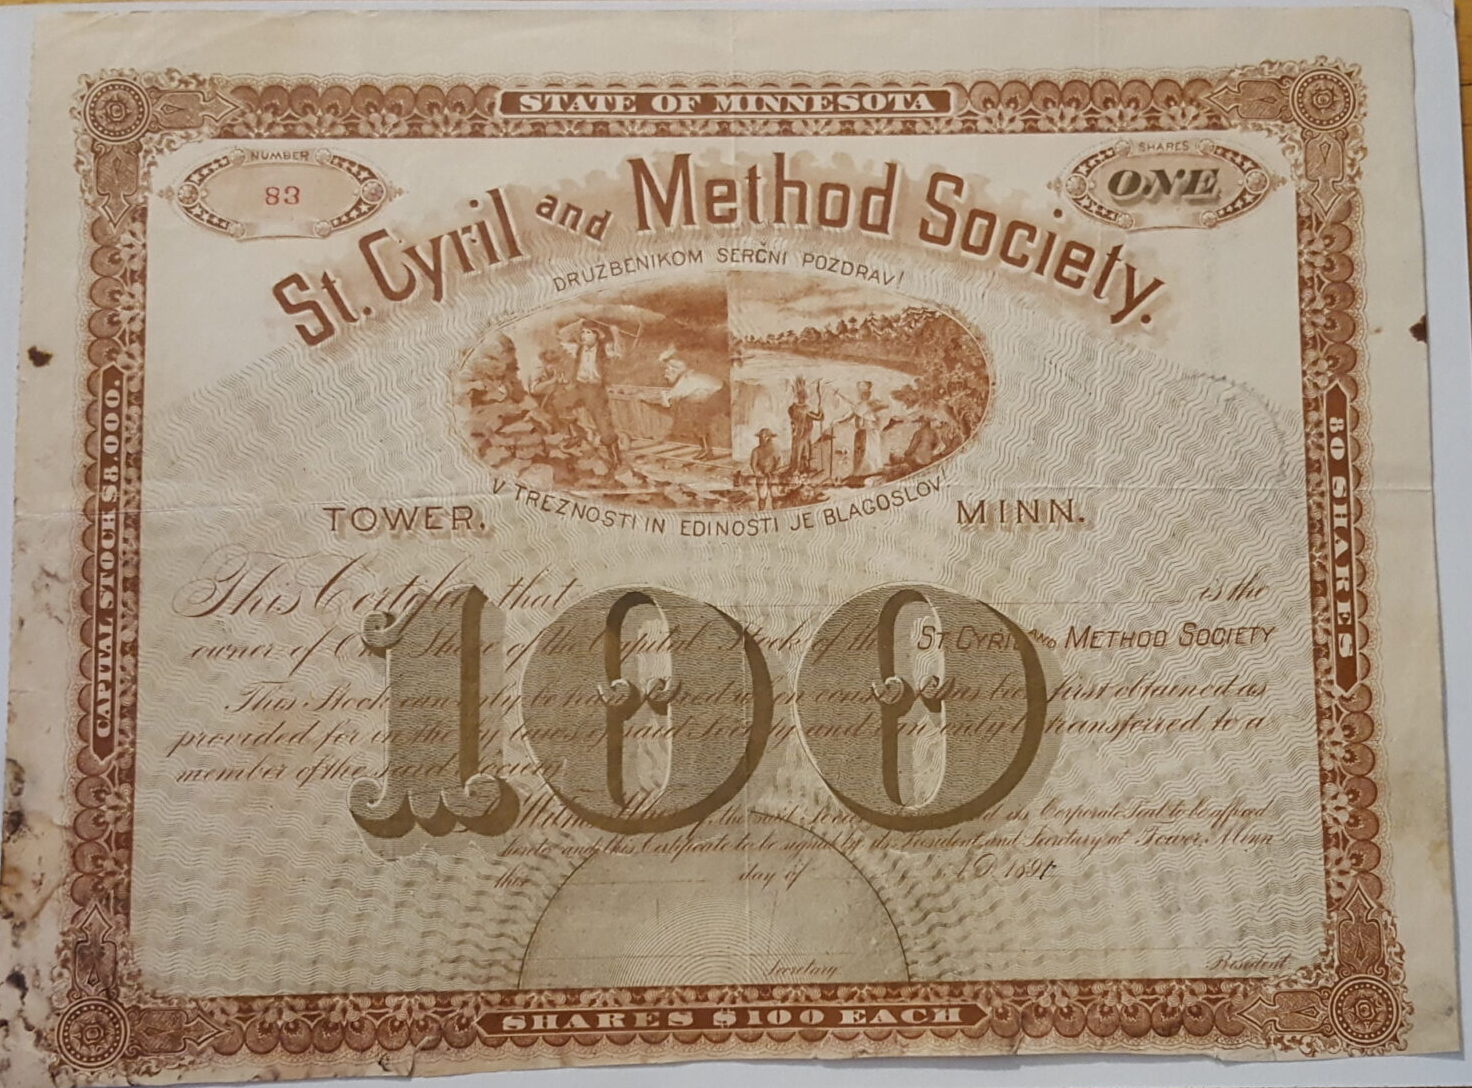 St. Cyril and Method Society - Stock Certificate